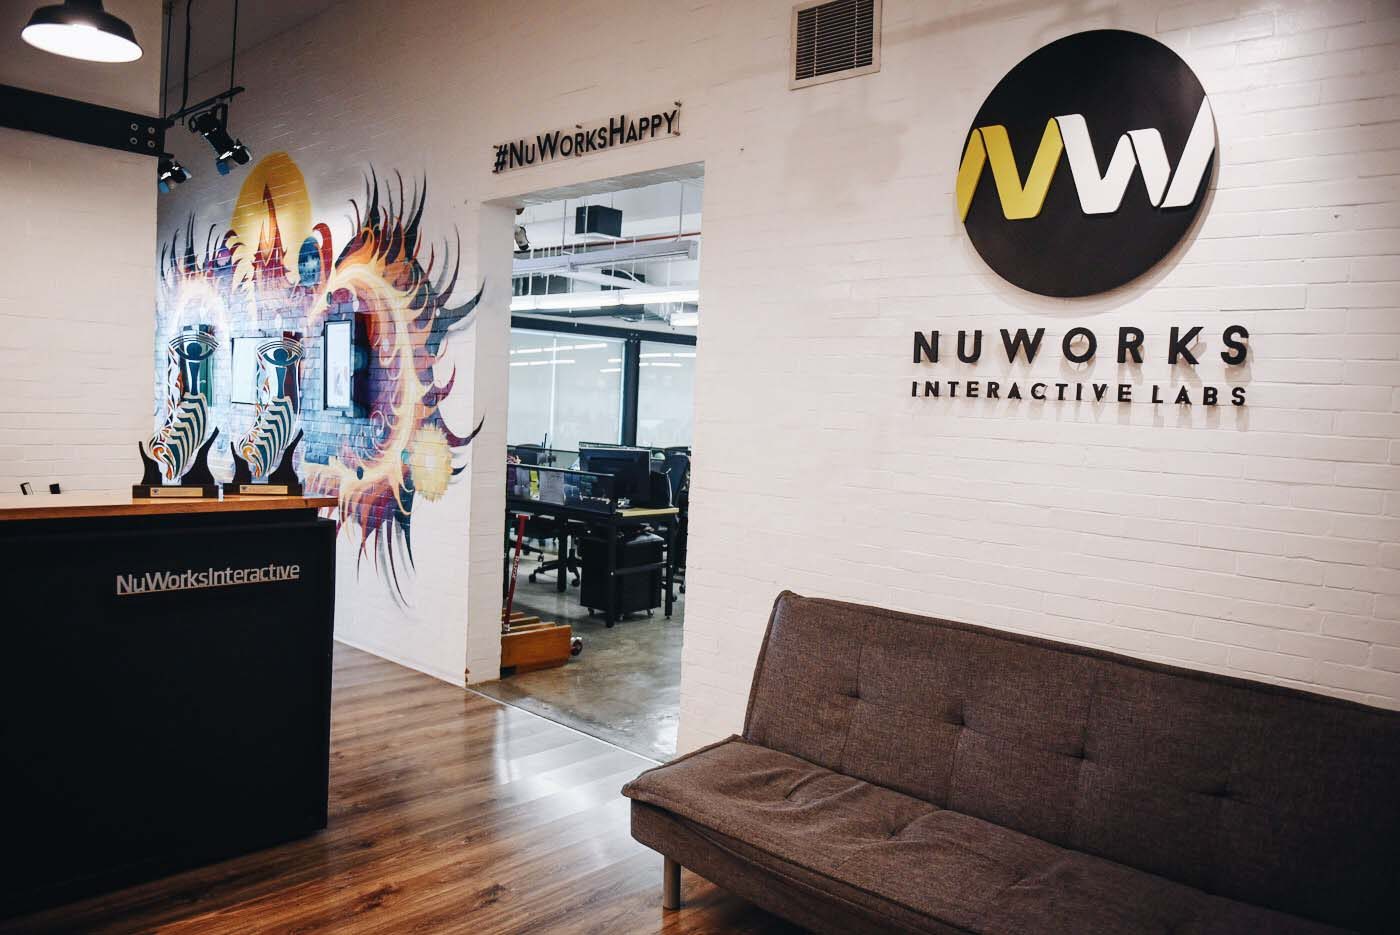 A portion of the lobby where touch screen television screens display the company's best works. By the entrance of the workspace, employees are reminded of the company's #NuWorksHappy philosophy.